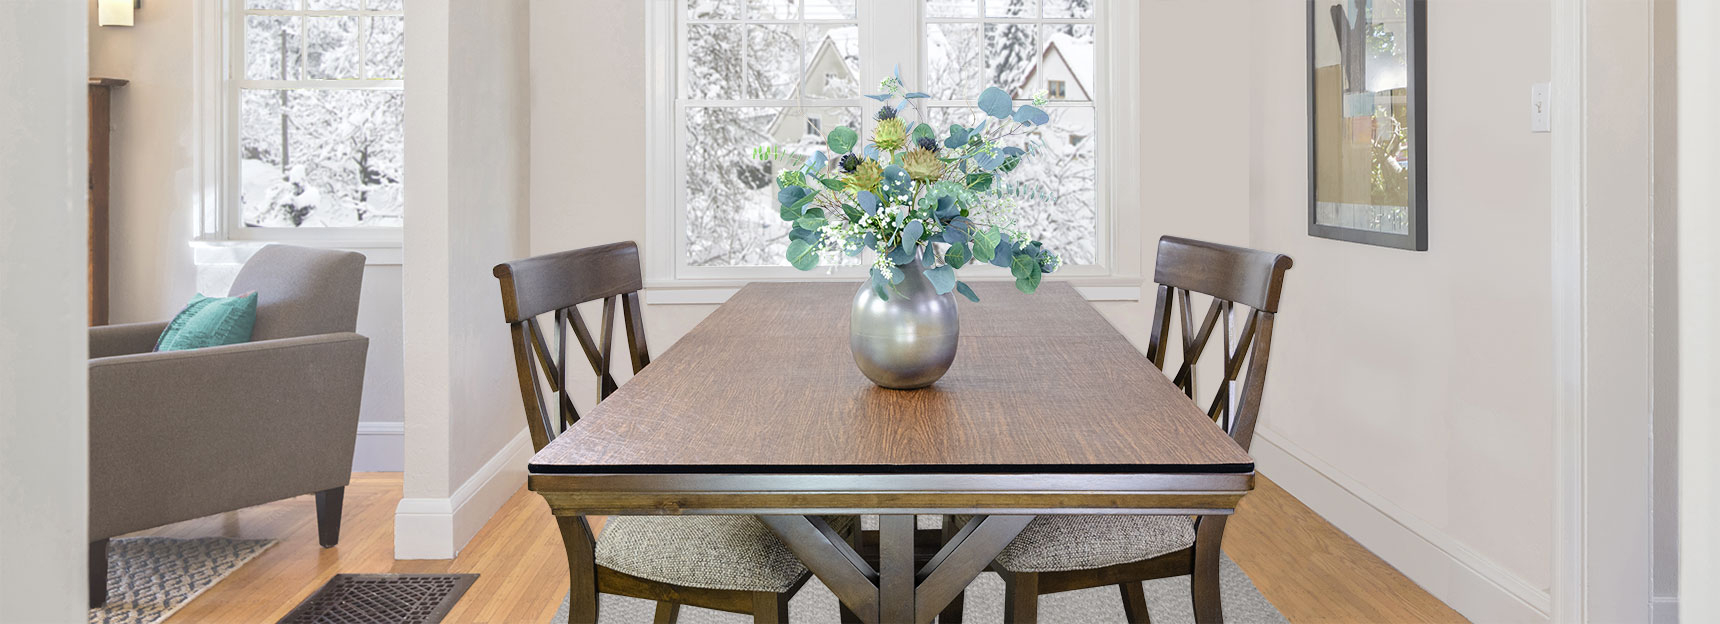 dining room table surface protector